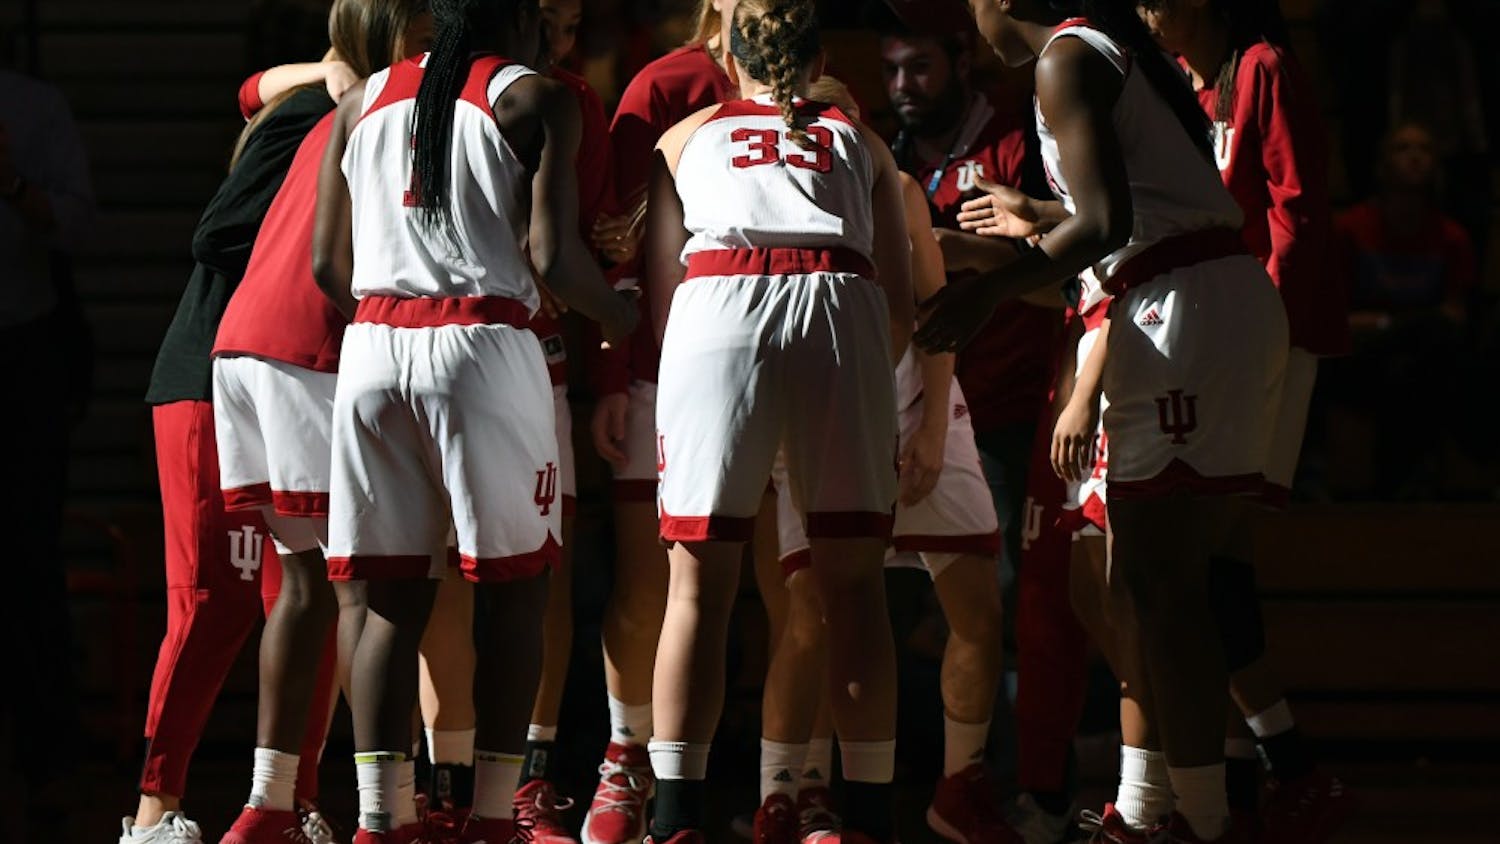 The IU women's basketball team huddles up prior to their game against Louisville on Nov. 30 in Simon Skjodt Assembly Hall. IU gets set to take on No. 14-ranked Maryland on Tuesday night.&nbsp;